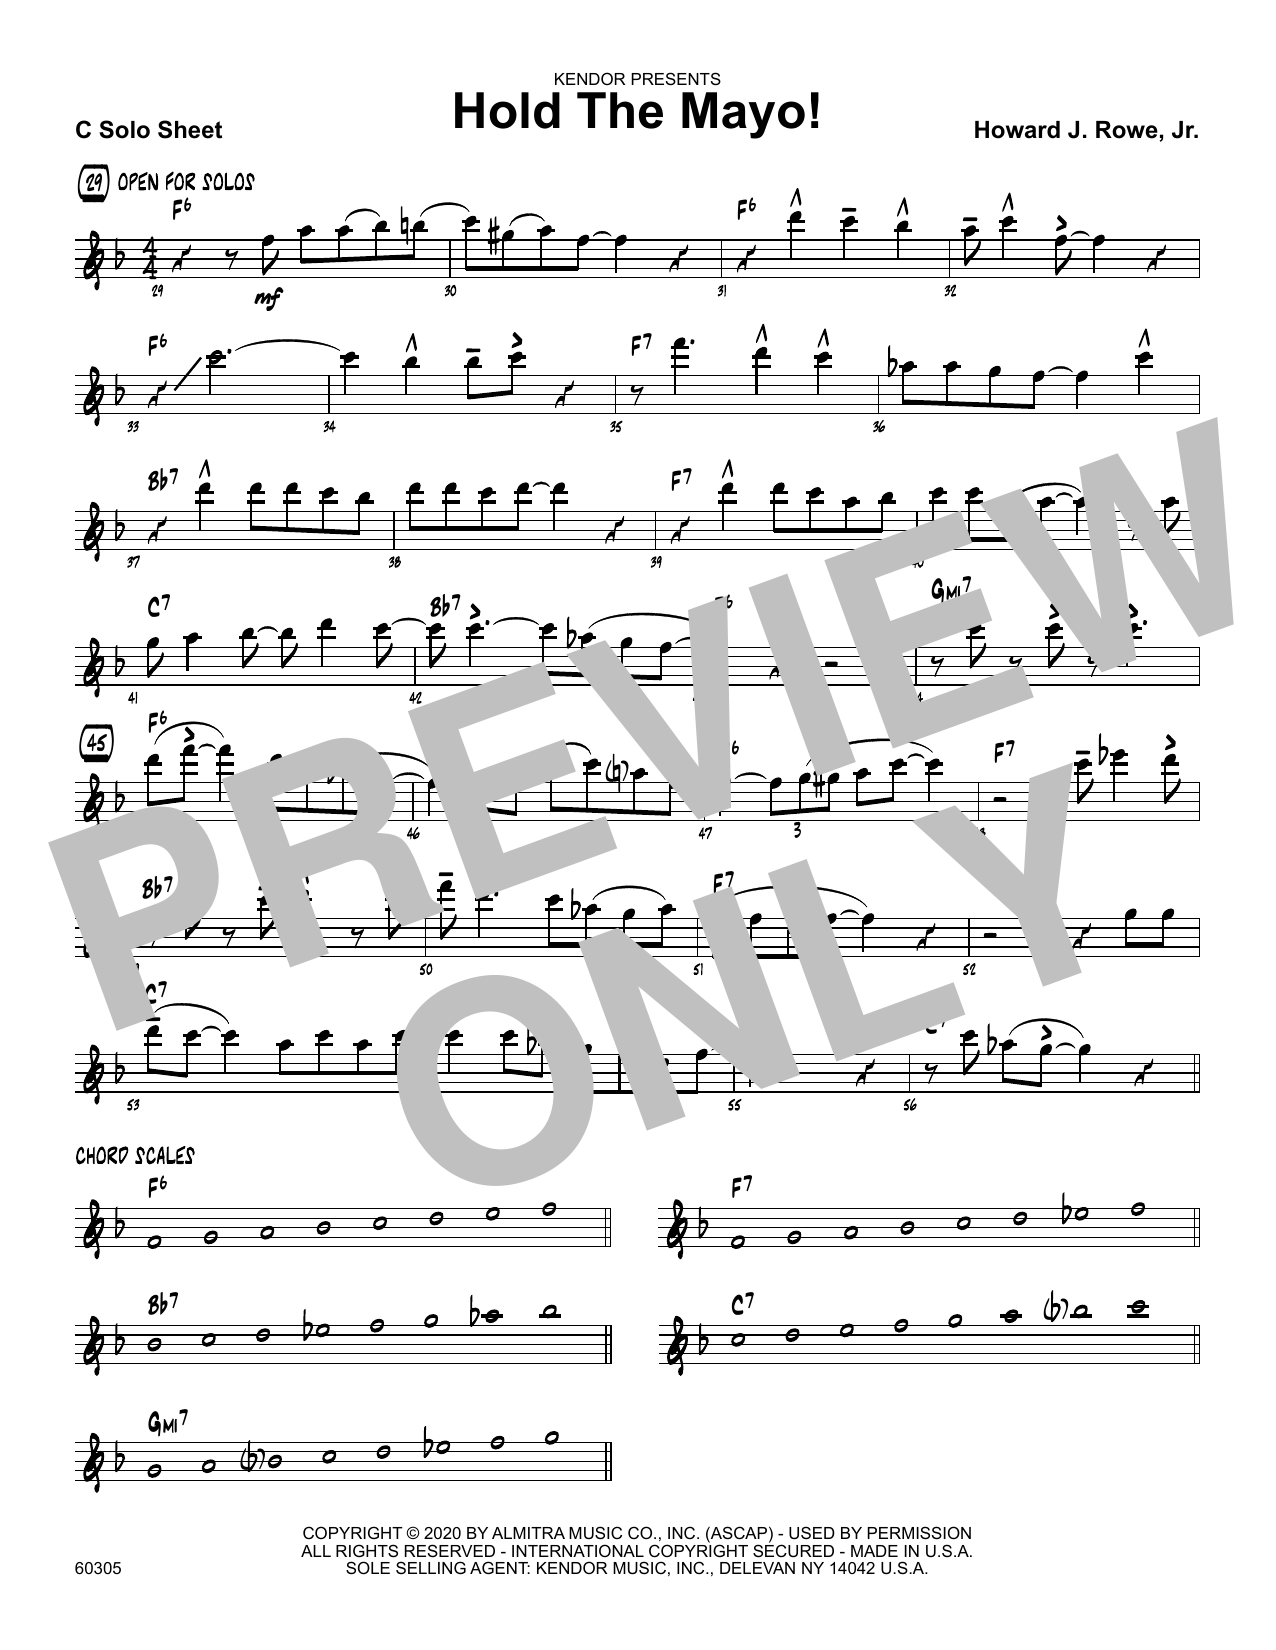 Download Howard Rowe Hold The Mayo! - C Solo Sheet Sheet Music